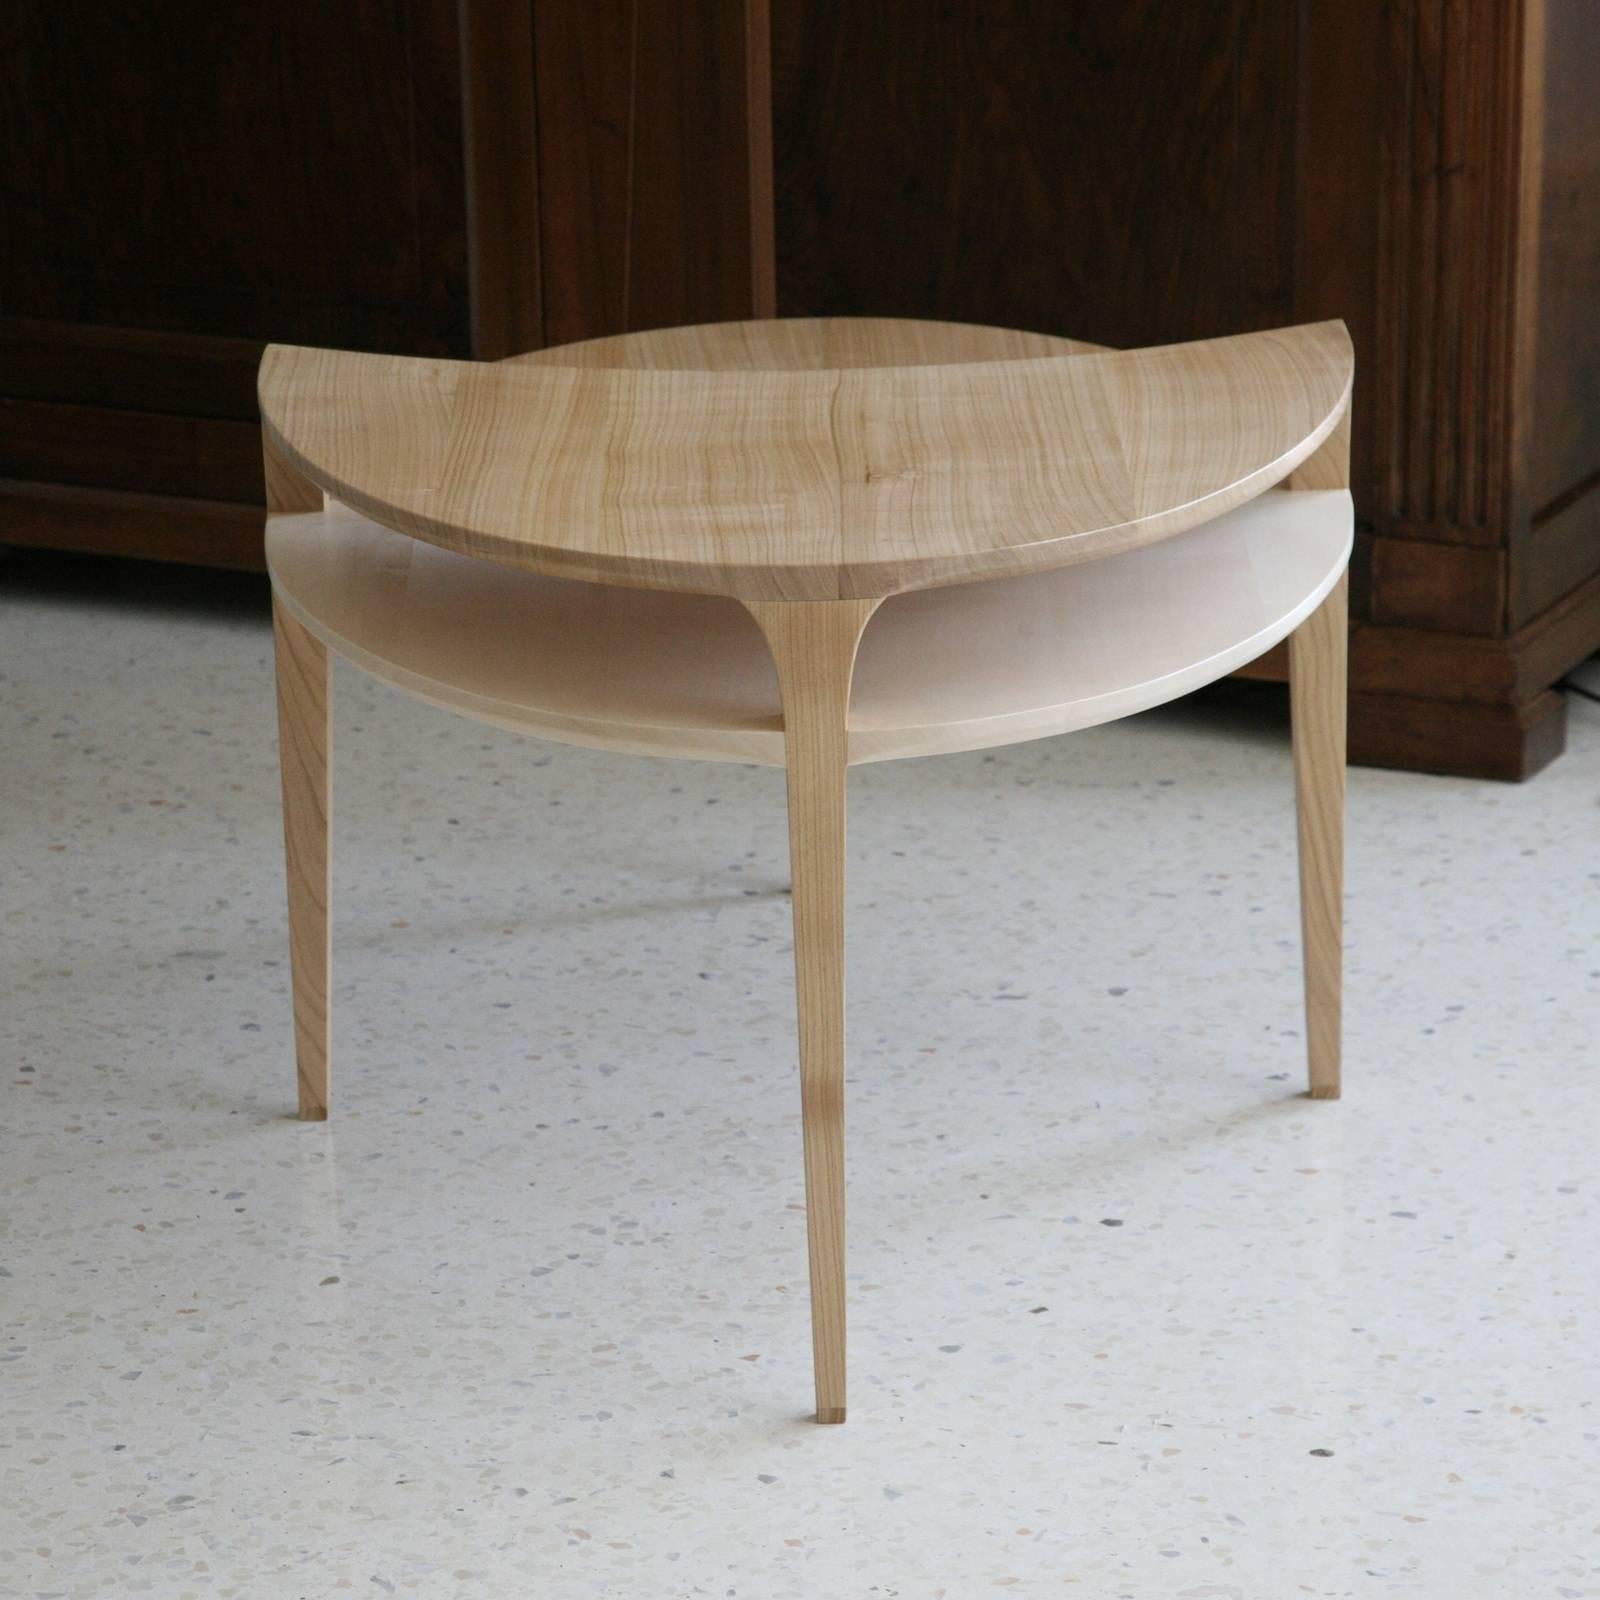 An exquisite example of contemporary design and masterful craftsmanship, this coffee table will enrich a modern living room, becoming its focal point. Its oval shape rests on four slightly tapered legs, two of which raise to support the elevated